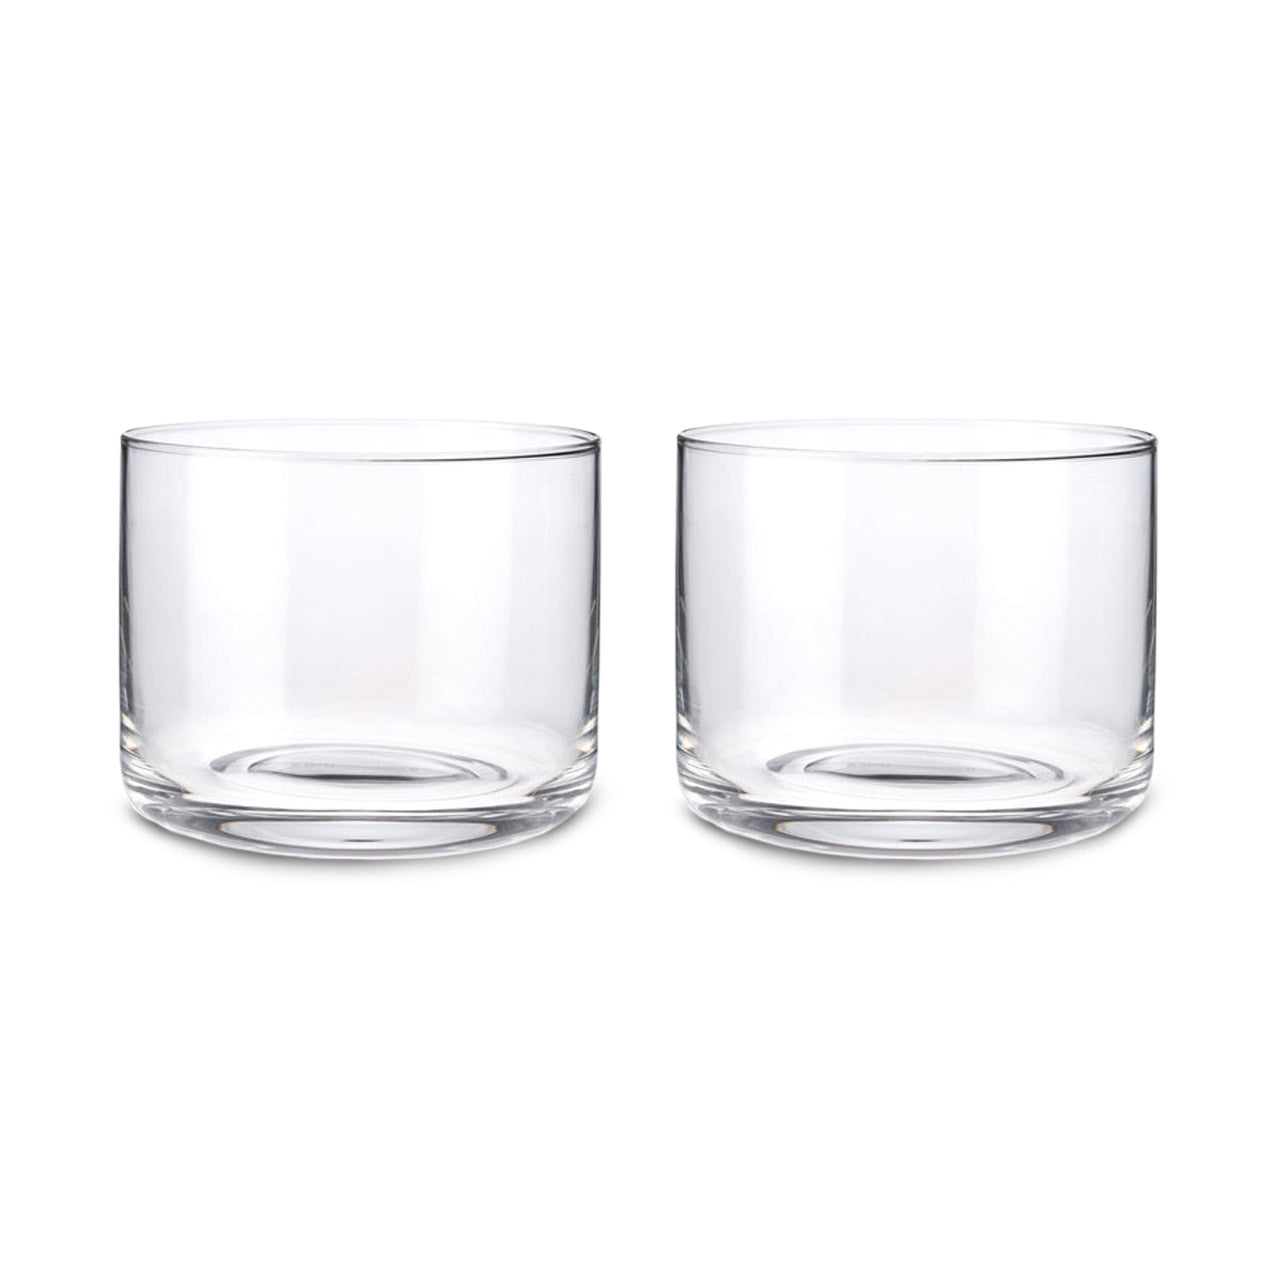 Crystal Negroni Glasses Set | Uncrate